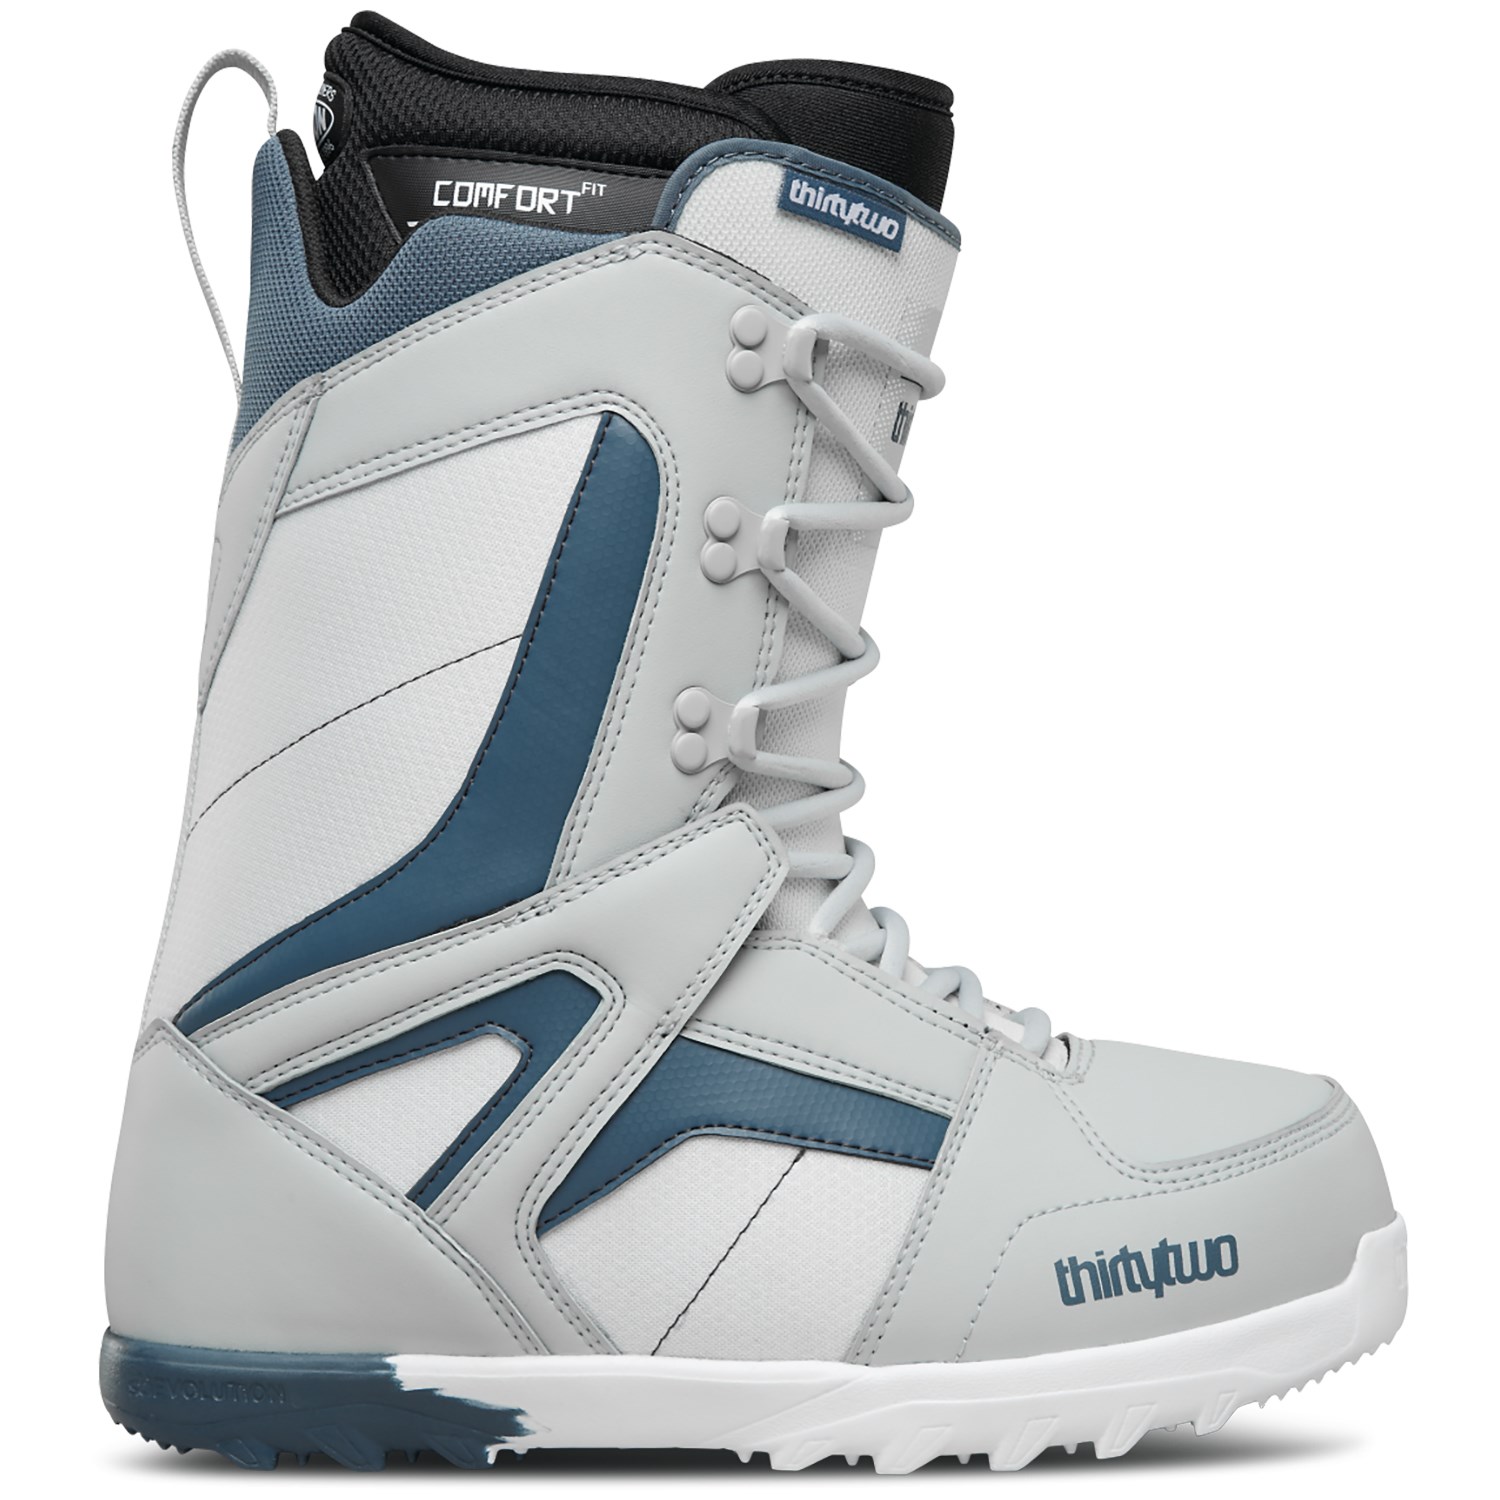 ThirtyTwo 32 Prion 18 Snowboard Boot Mens